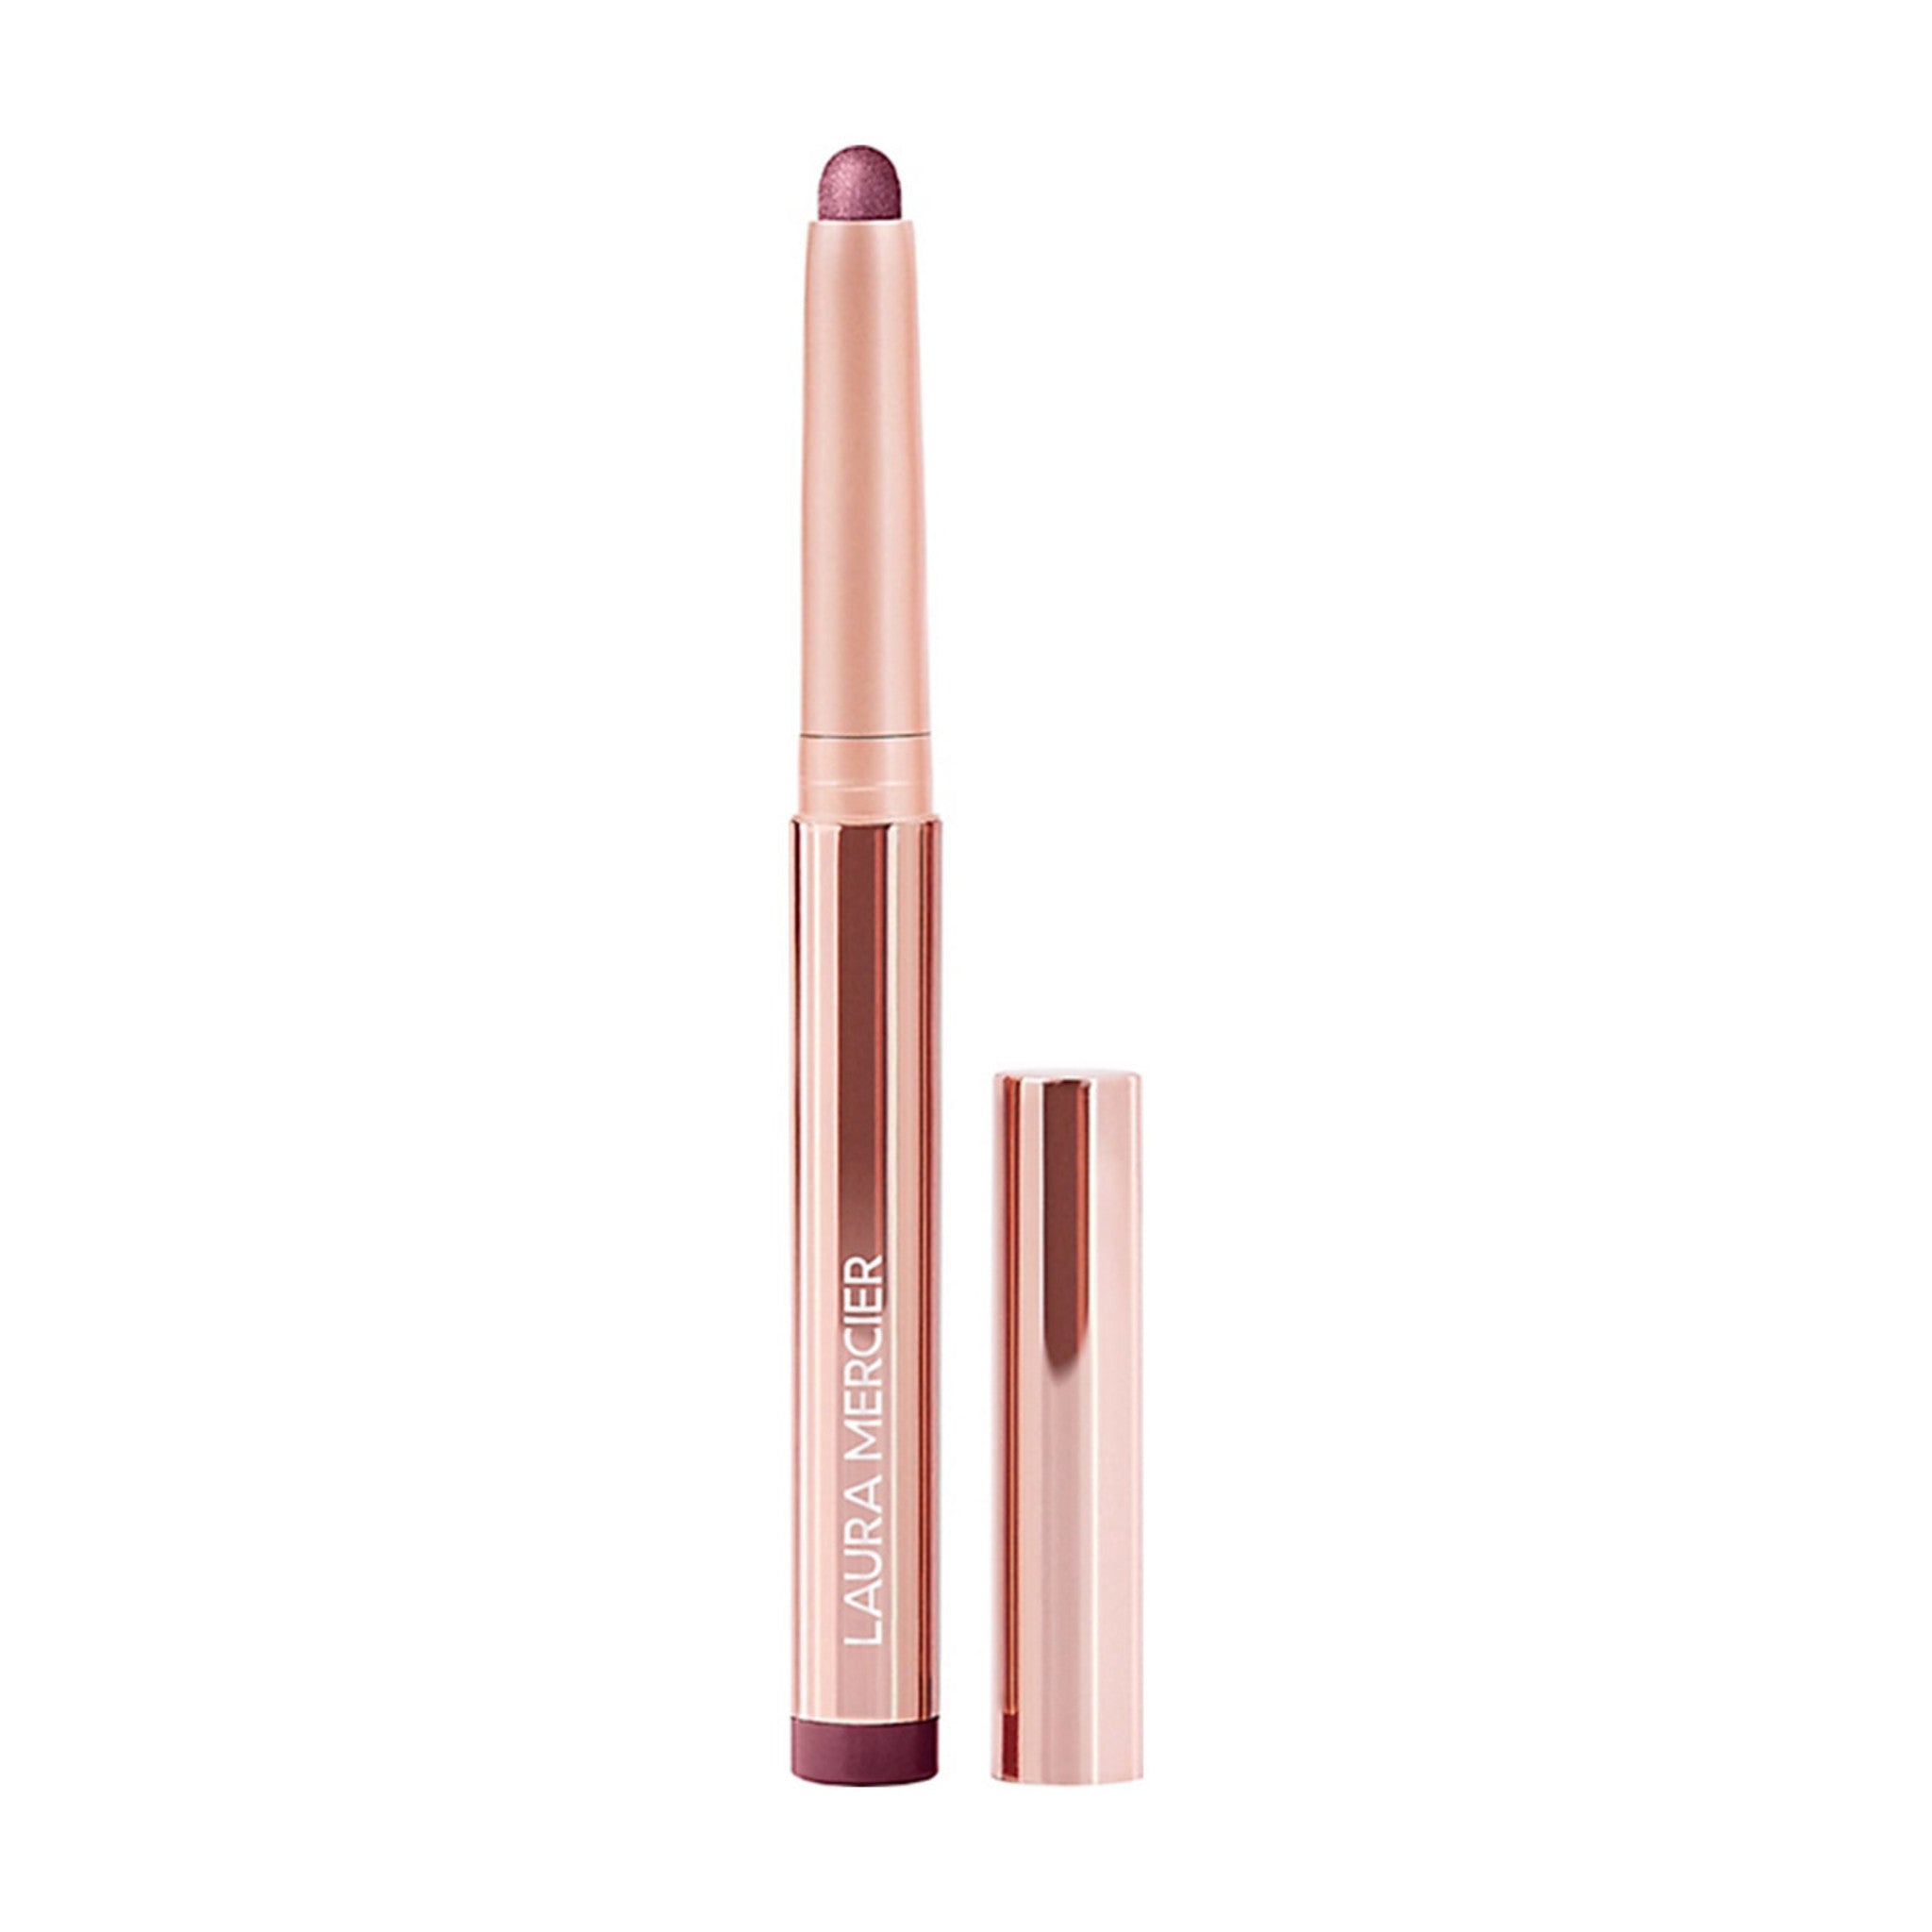 Laura Mercier RoseGlow Caviar Stick Eye Color Color/Shade variant: Rose Thorn main image. This product is in the color purple